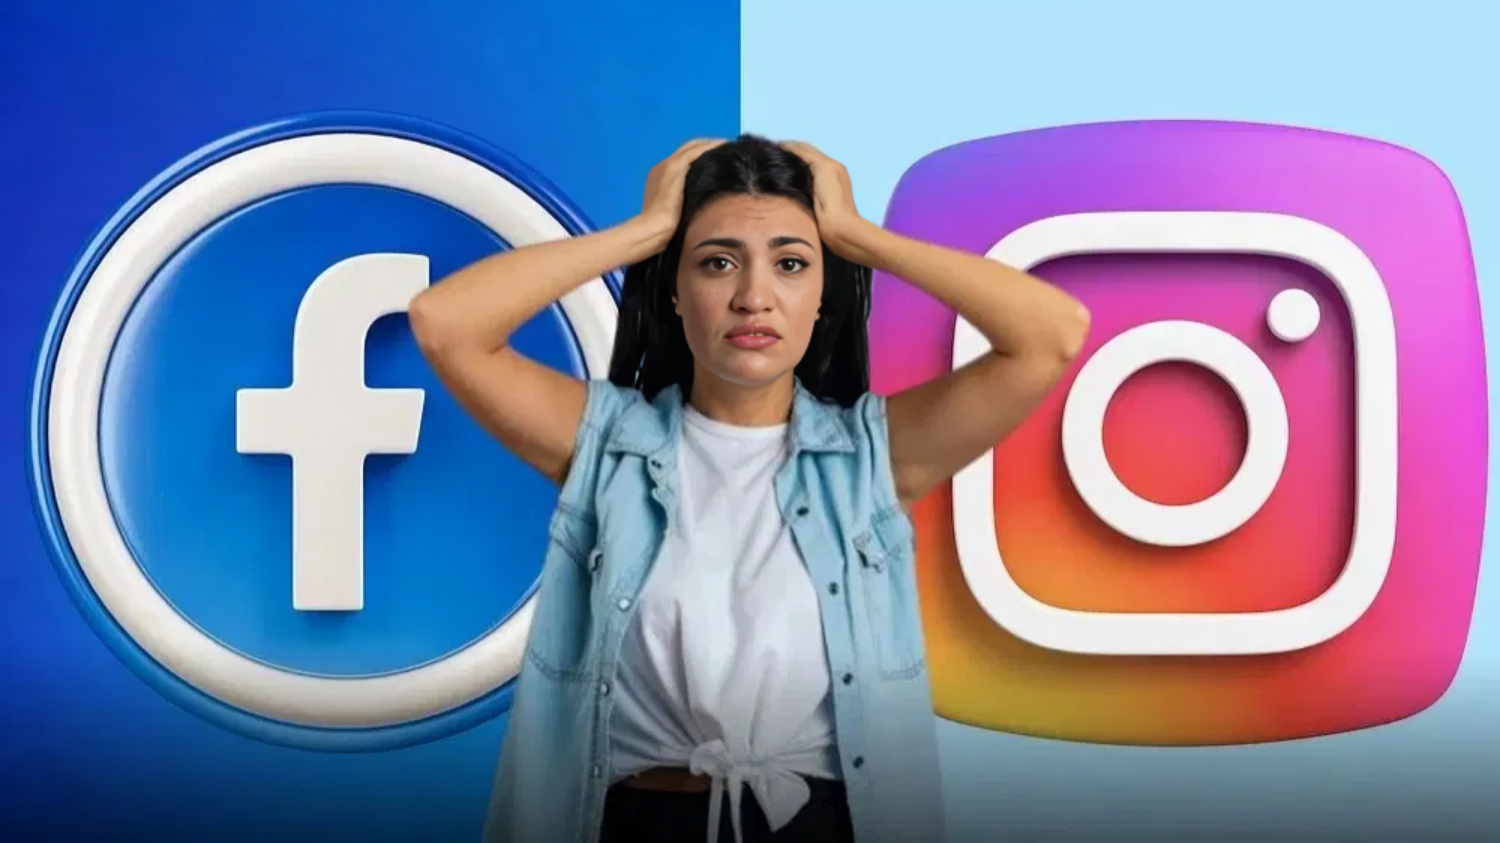 Facebook-Instagram down affected Meta's share, so the share decreased की तस्वीर